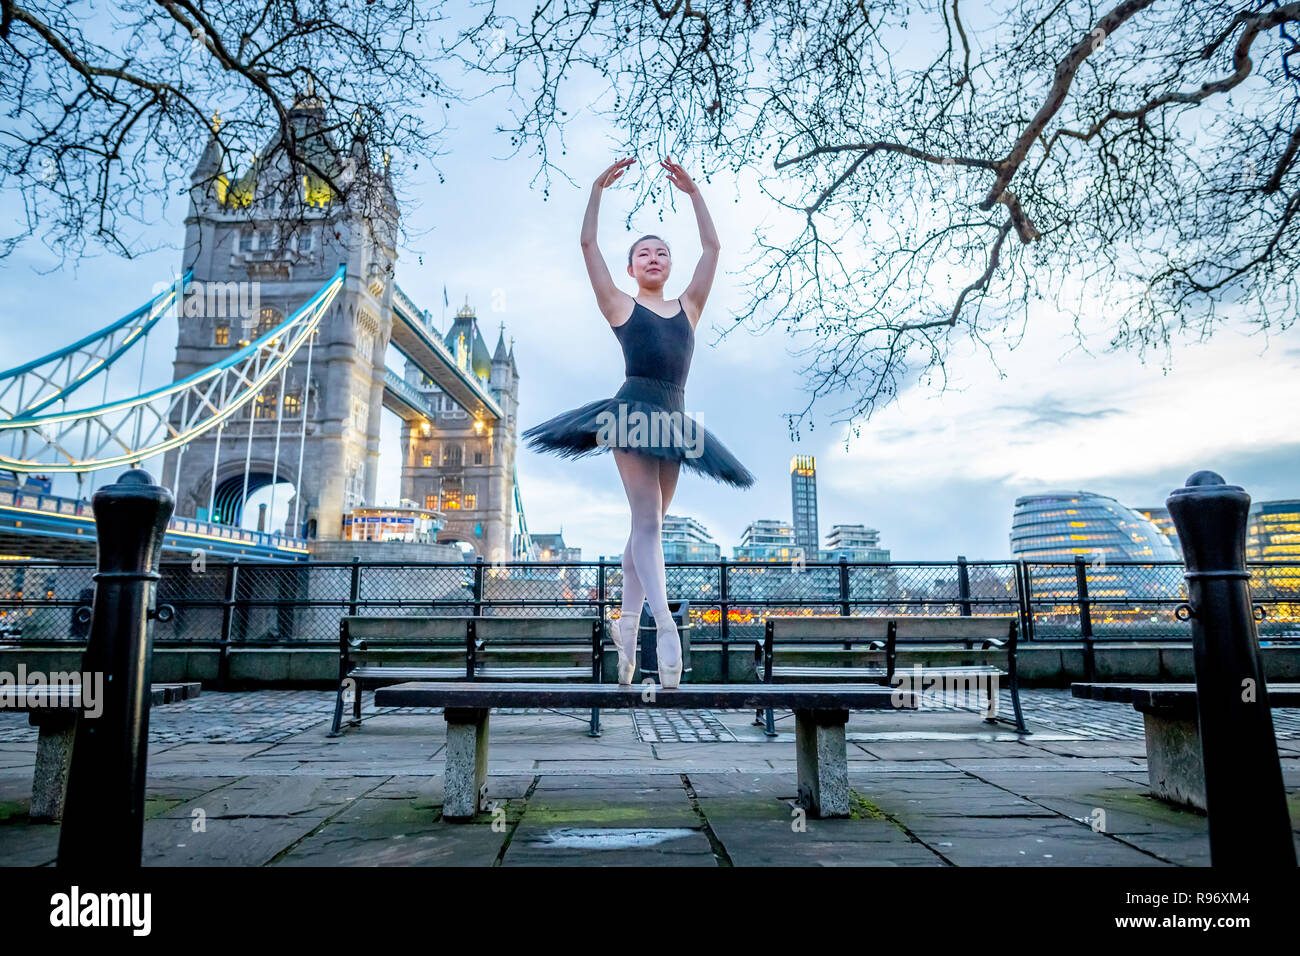 London, UK. 20th December, 2018. Dancers from Semaphore Ballet Company perform at Tower Hill in the last evening light before the winter solstice. Tonight will be the longest night of the year with the sun not rising until 08:03 GMT on Friday morning. Dancer pictured: Natsuki Uemura. Credit: Guy Corbishley/Alamy Live News Stock Photo